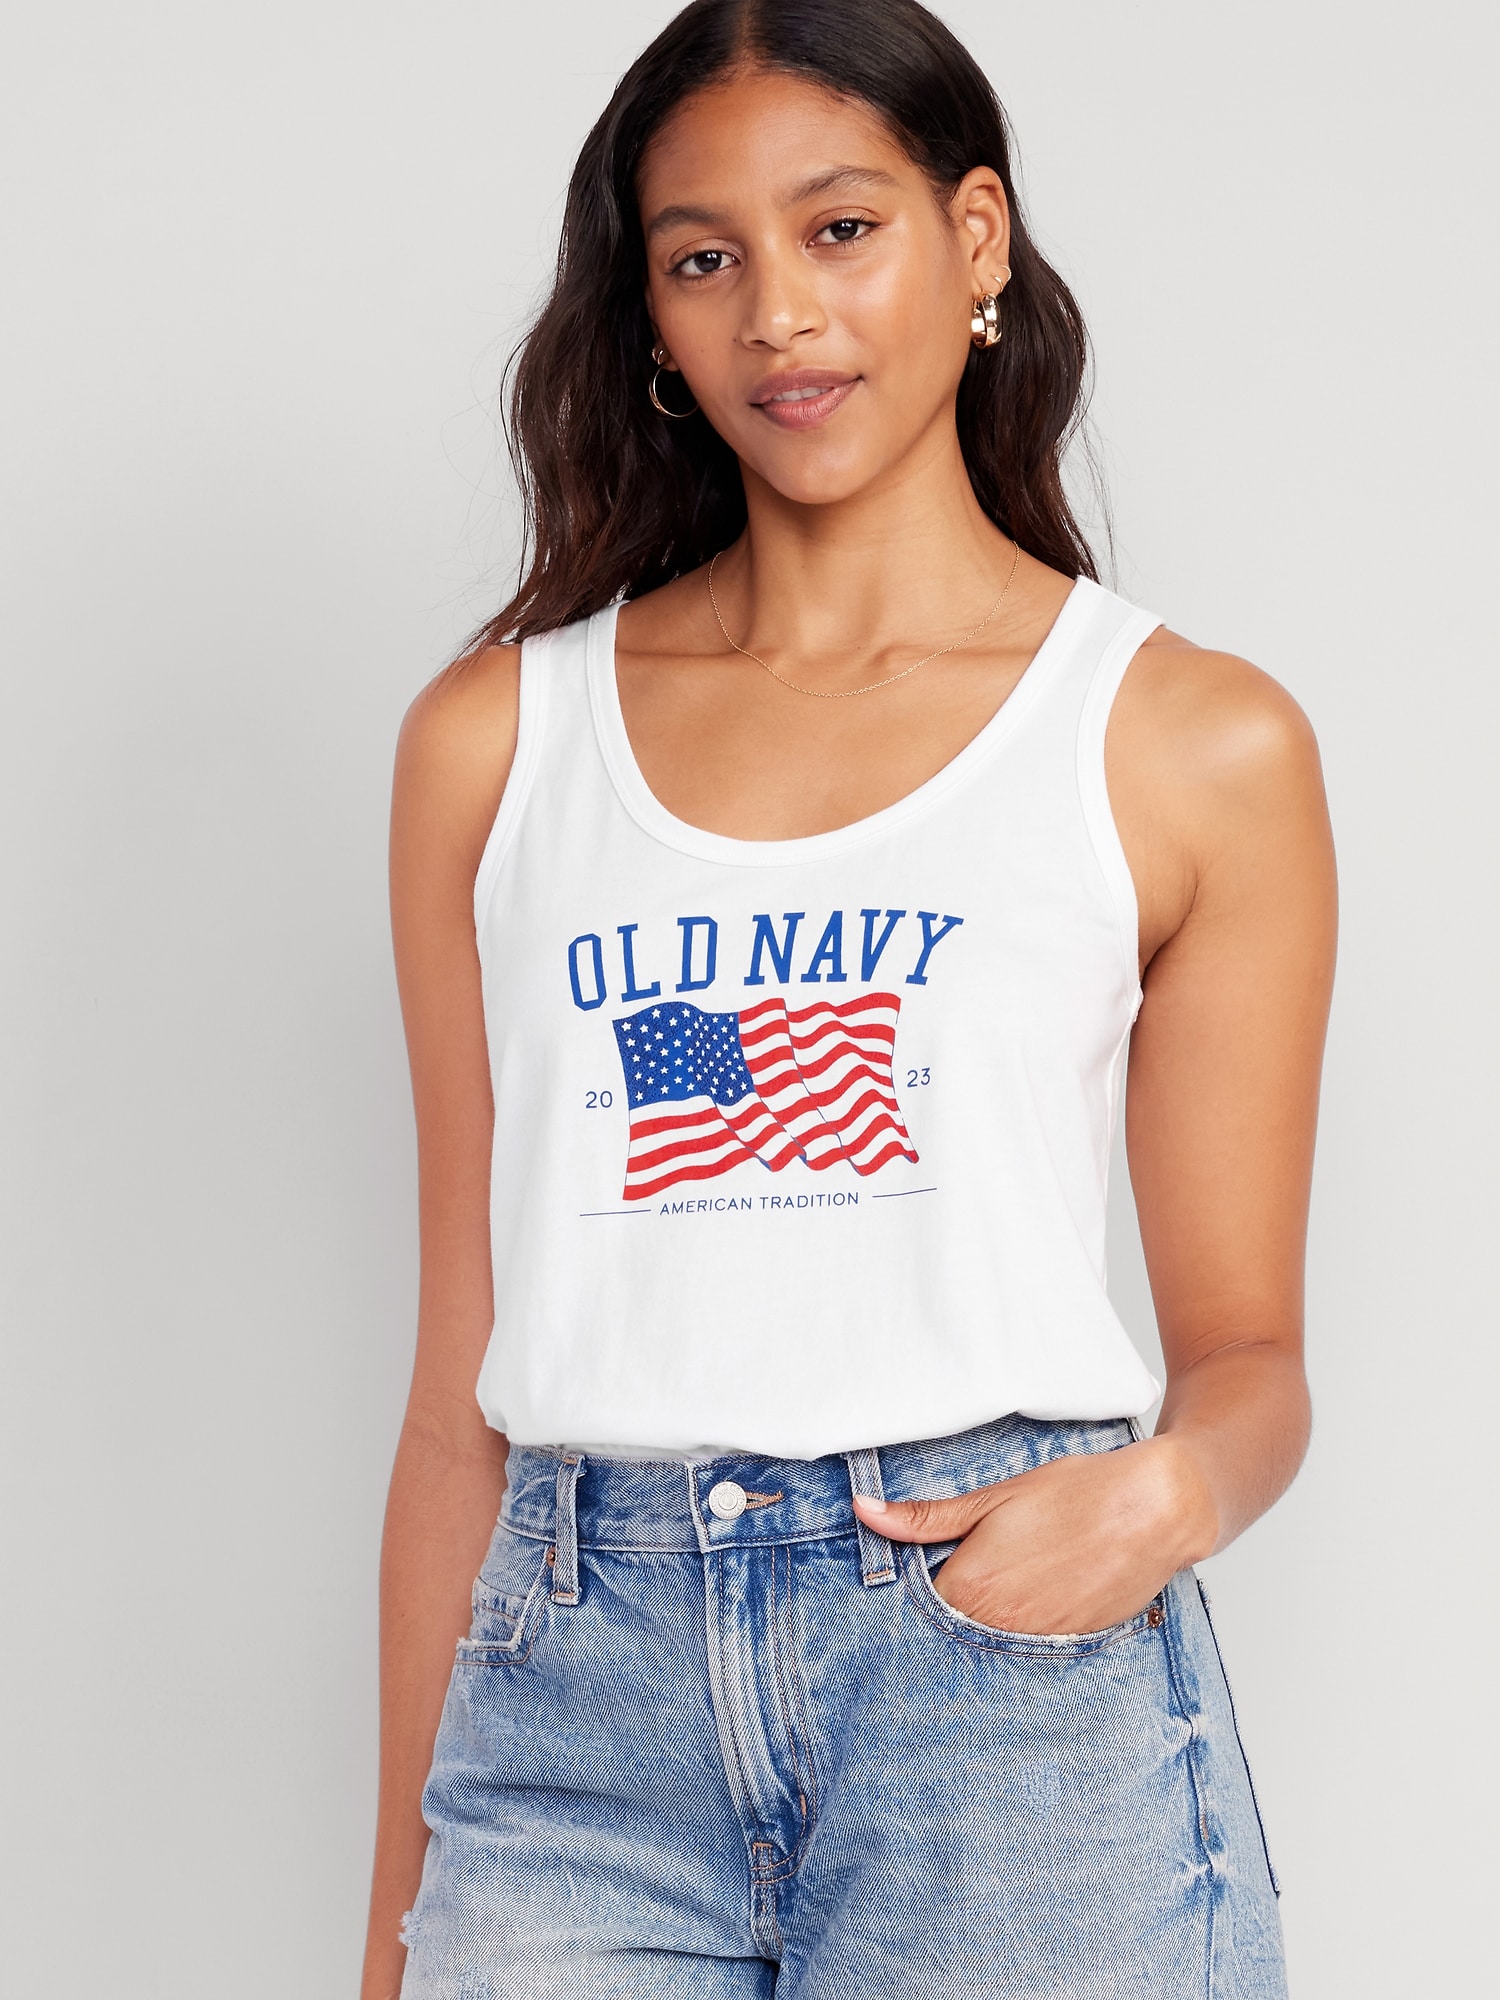 Old Navy Makes Purple Patriotic for a Good Cause